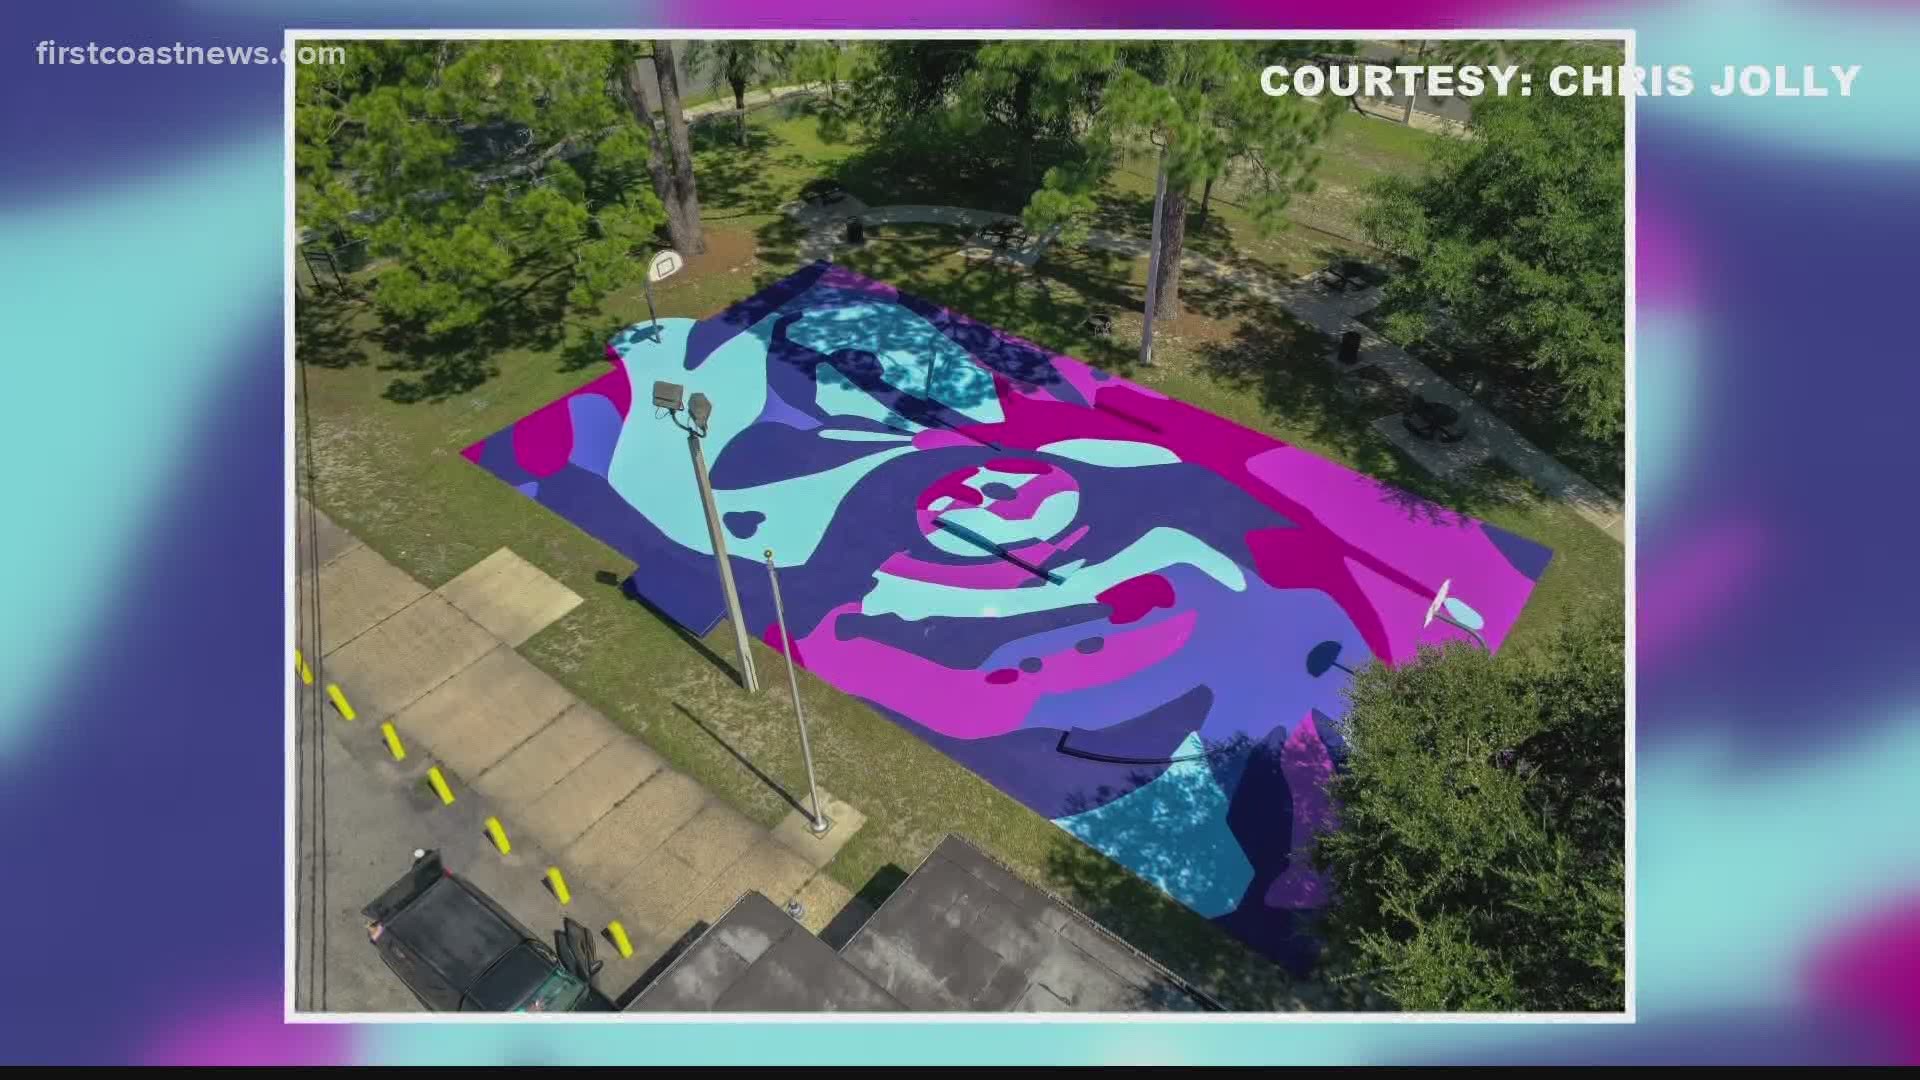 It is one of two locations that have been turned into skate parks. The other is located at Florida Dwight Park, and it will be painted too.